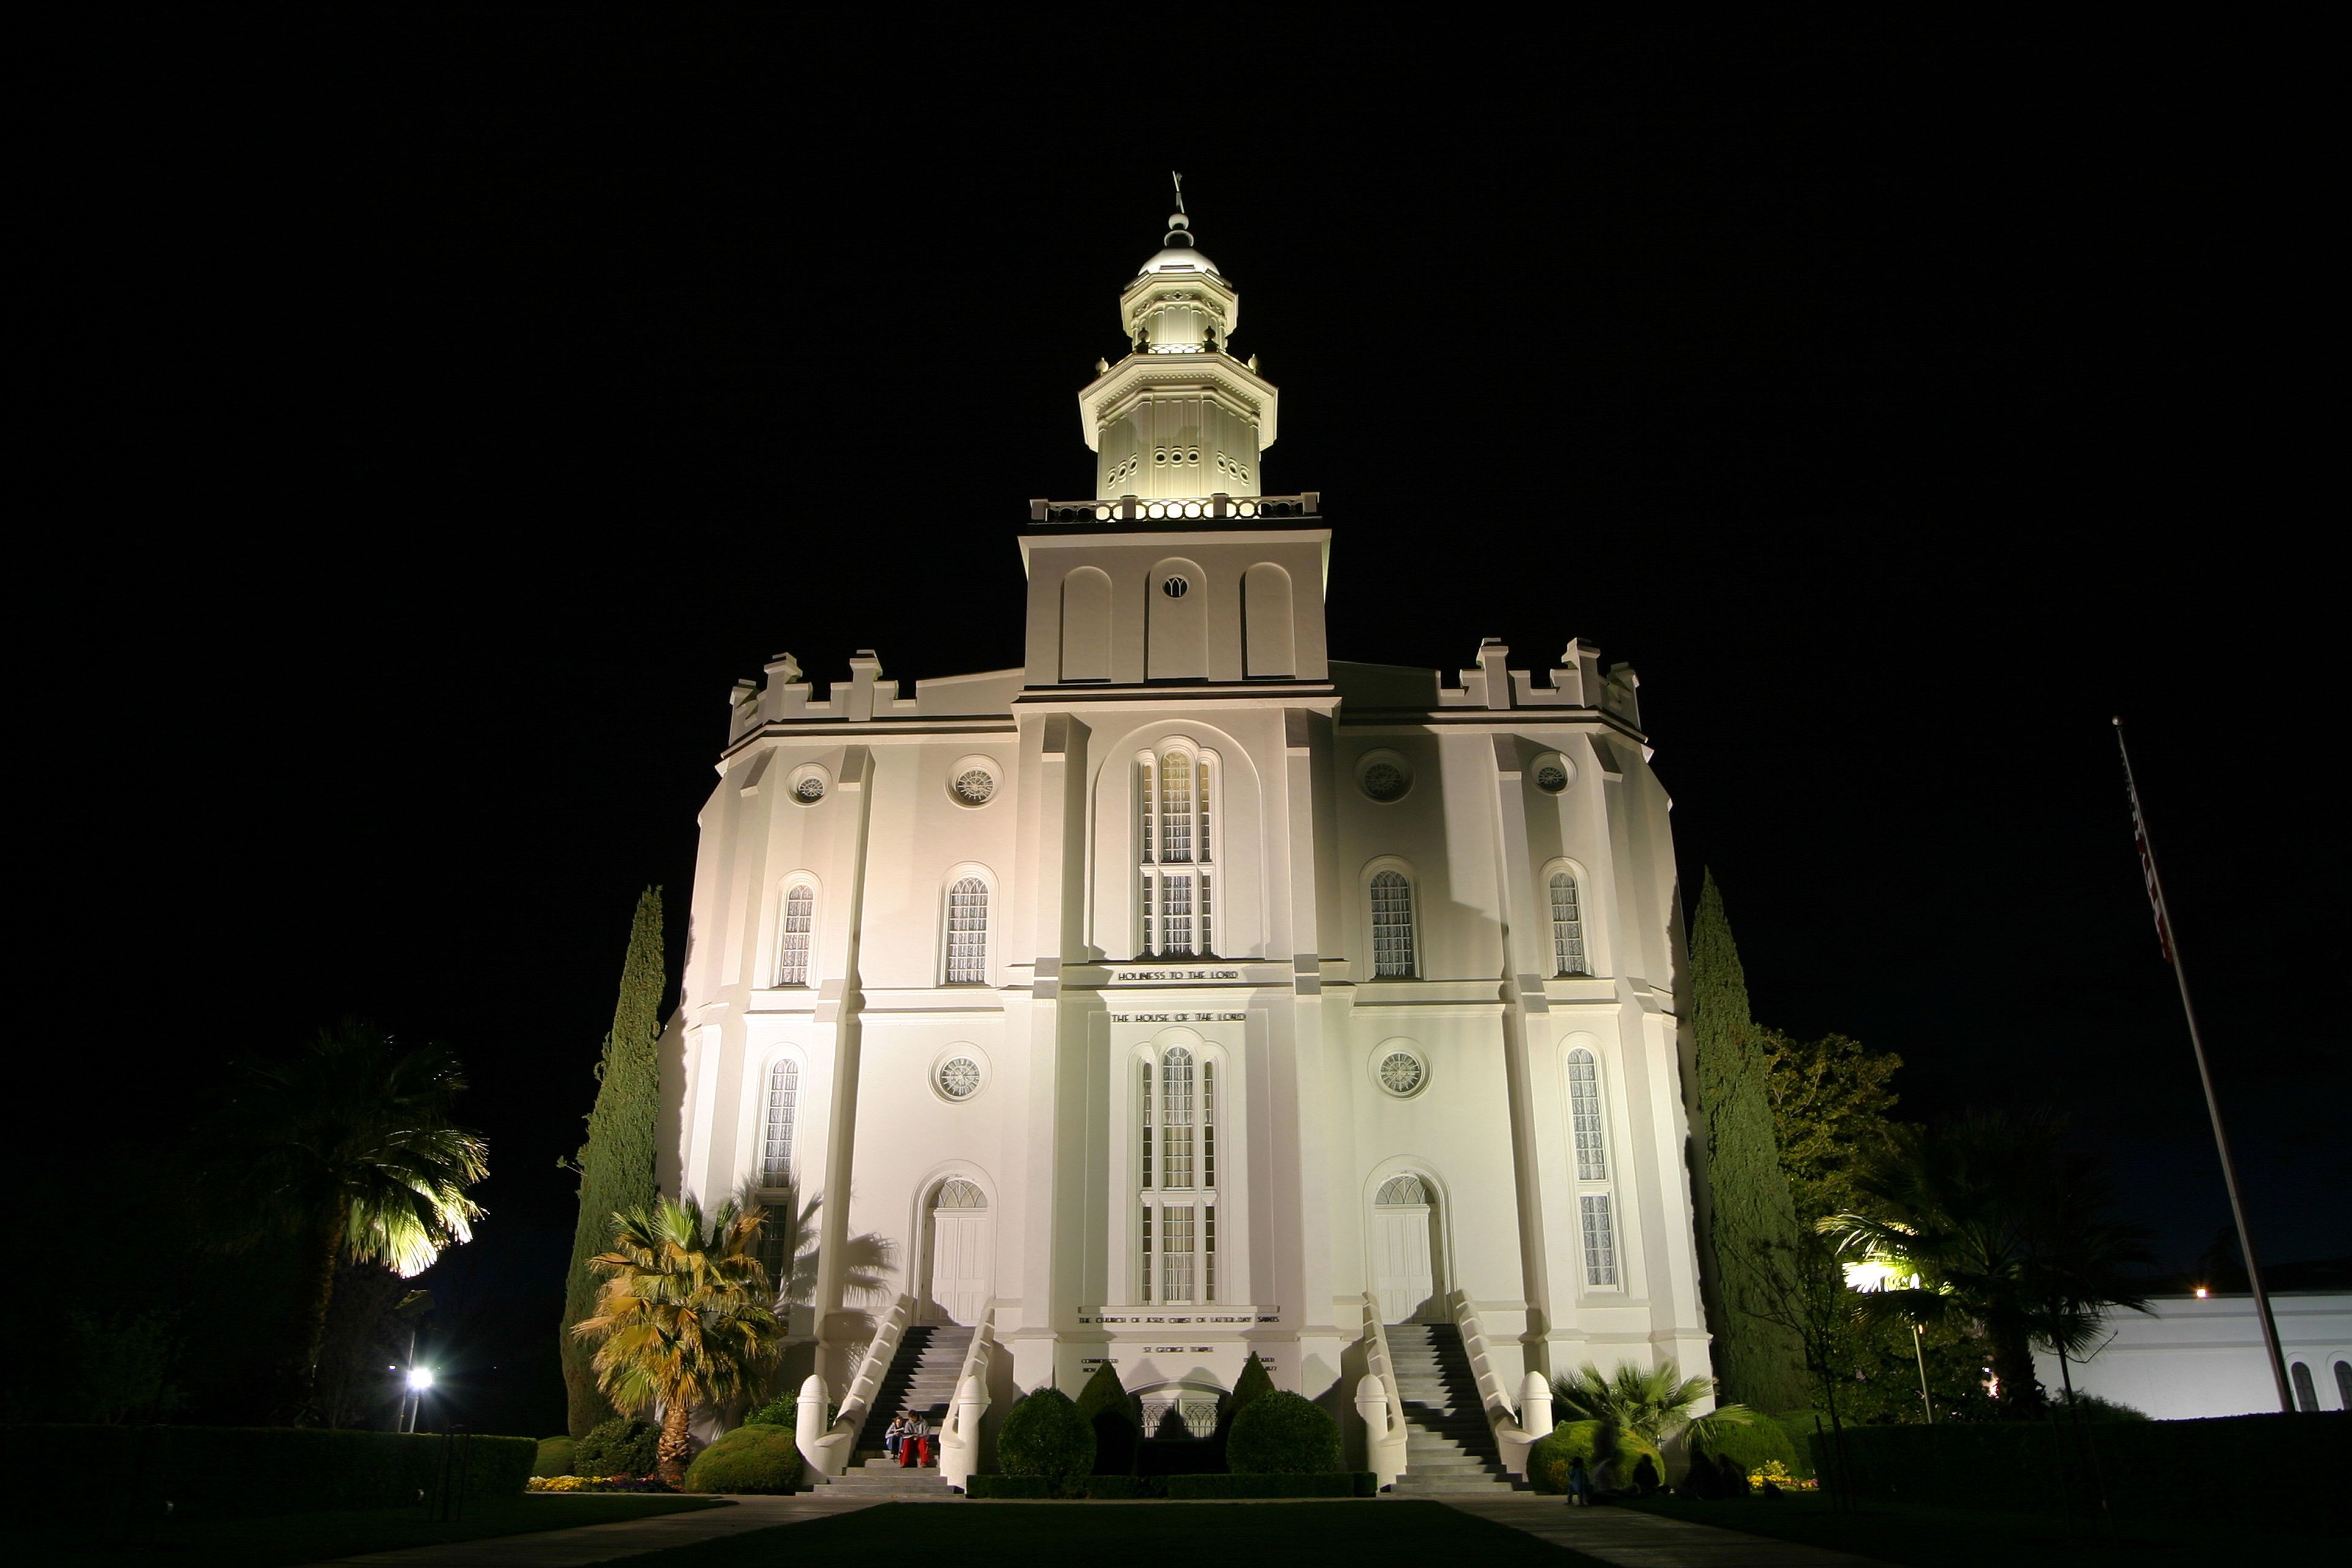 The St. George Utah Temple in the evening, including the entrance.